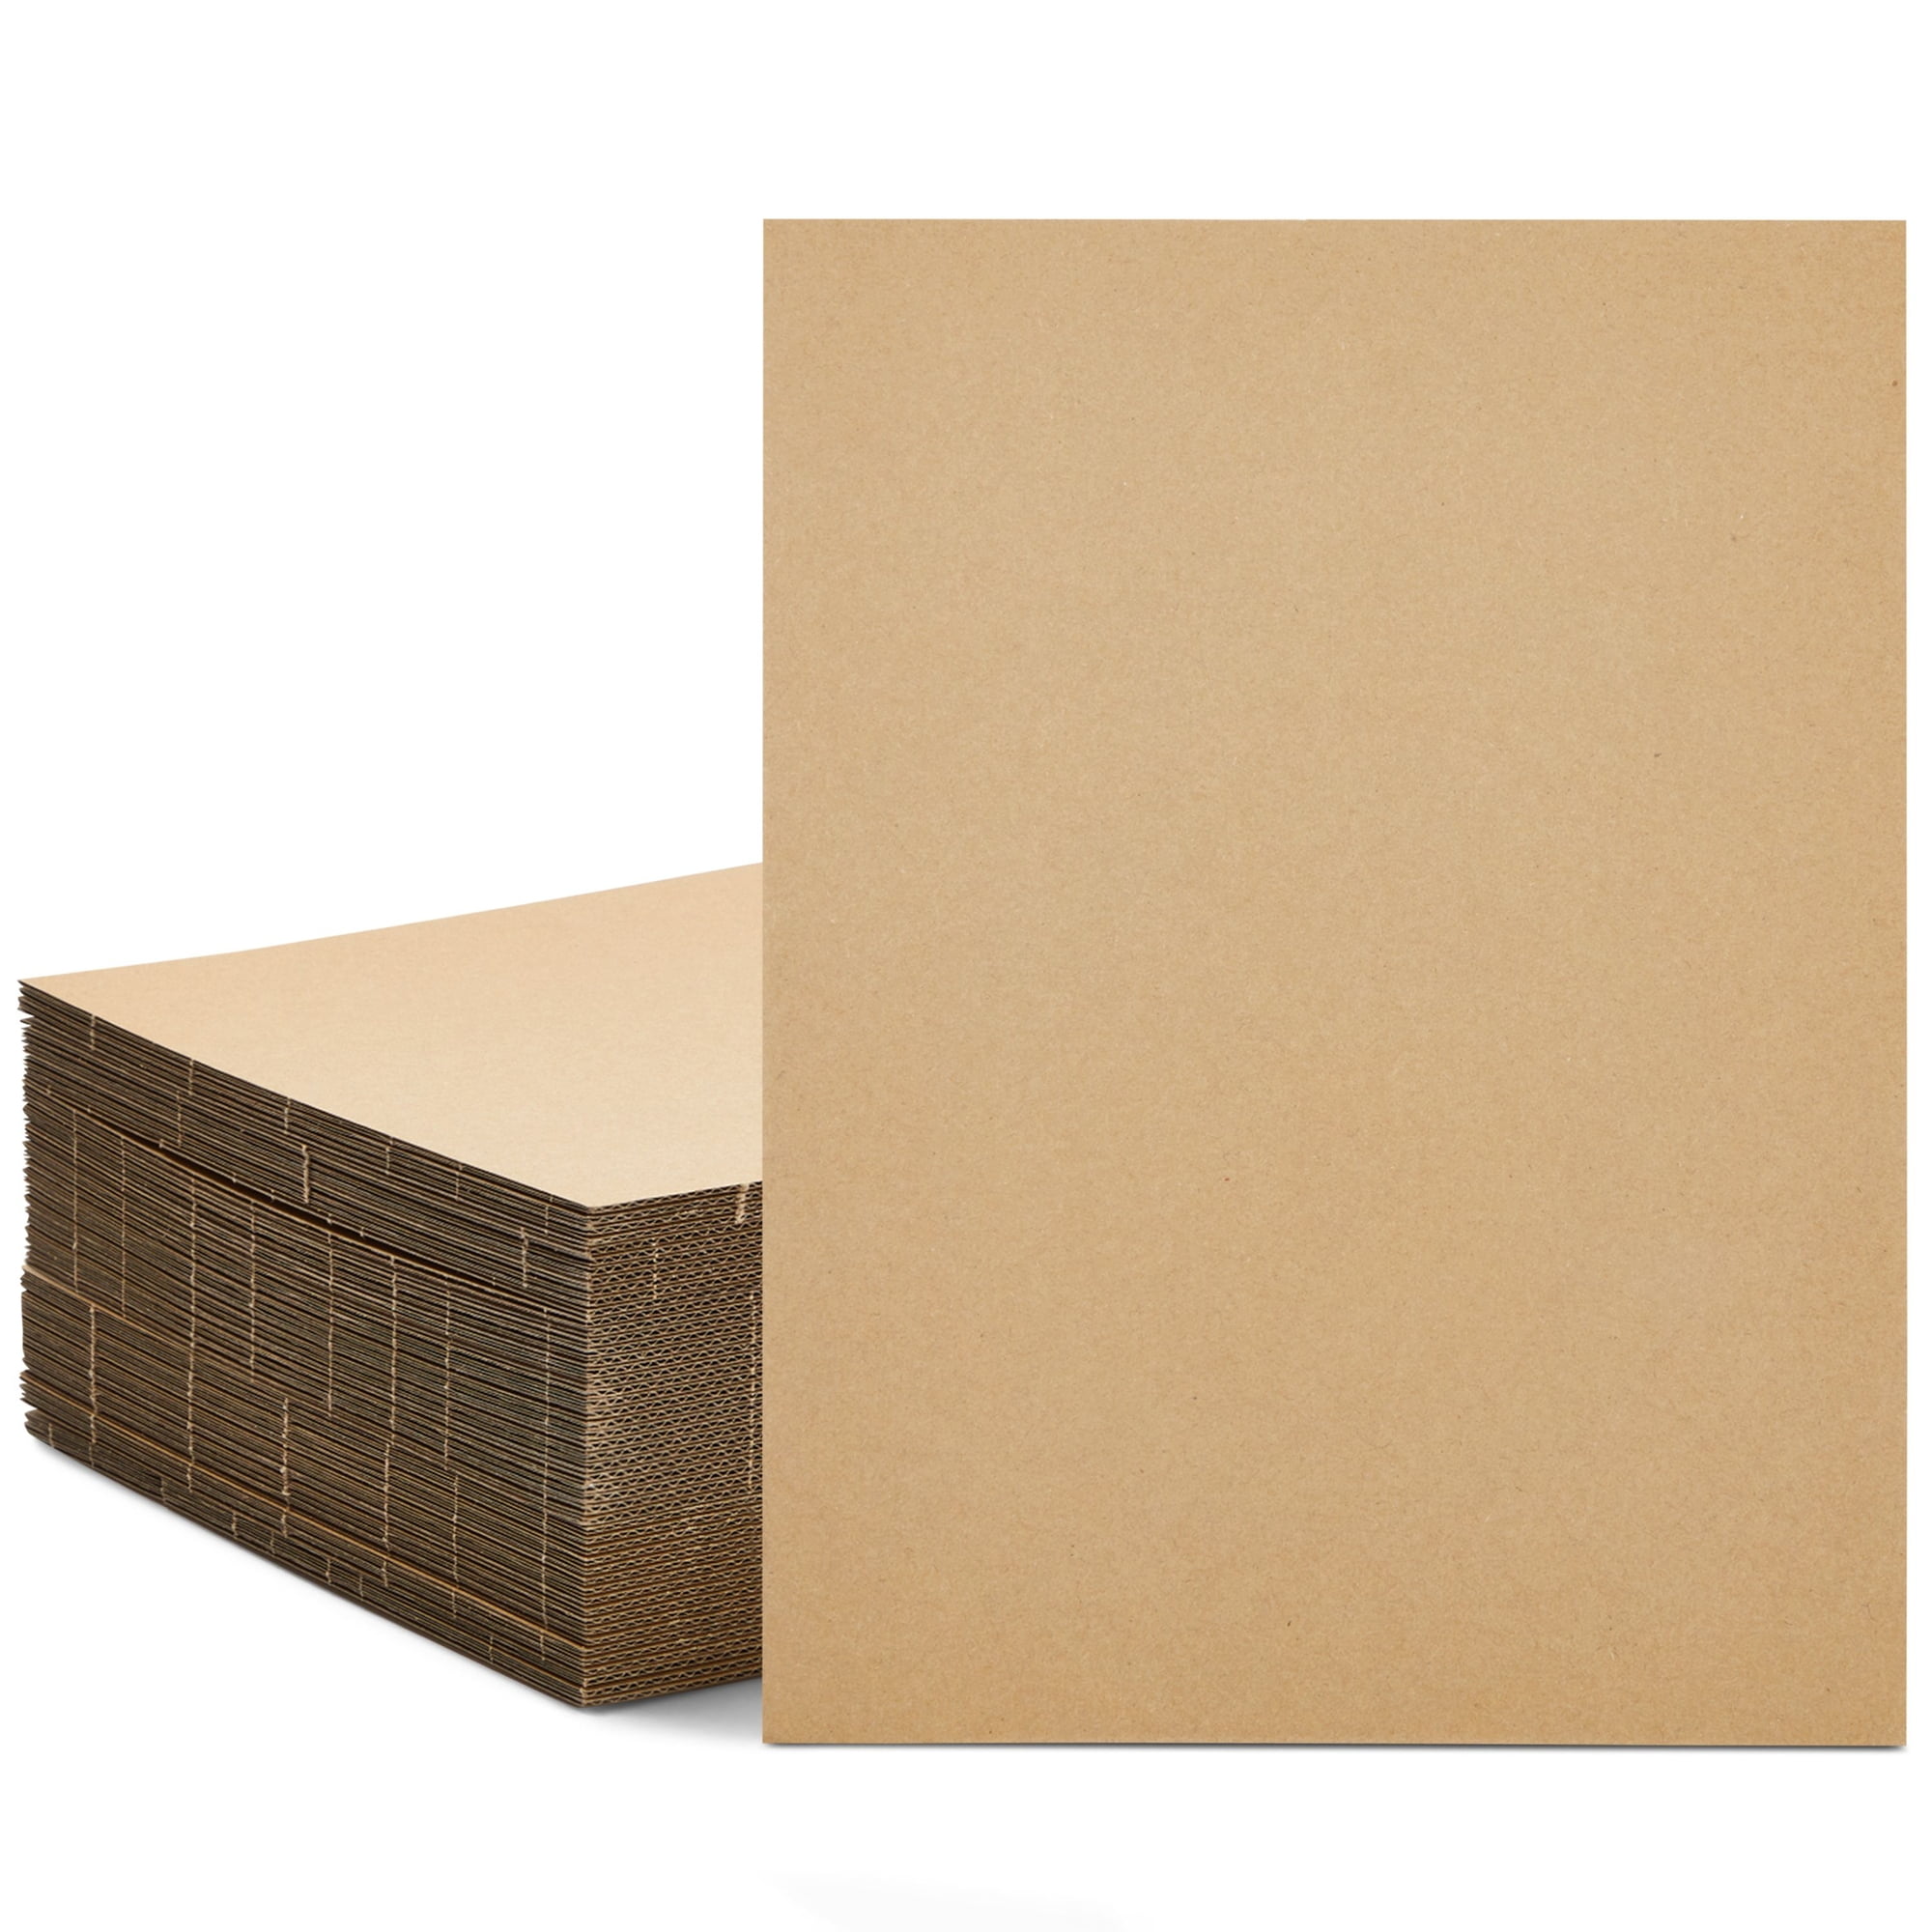 50-Pack of Corrugated Cardboard Sheets 9x12, Flat Card Boards, Packaging  Inserts for Shipping, Mailing, Arts and Crafts, DIY Projects, Packing